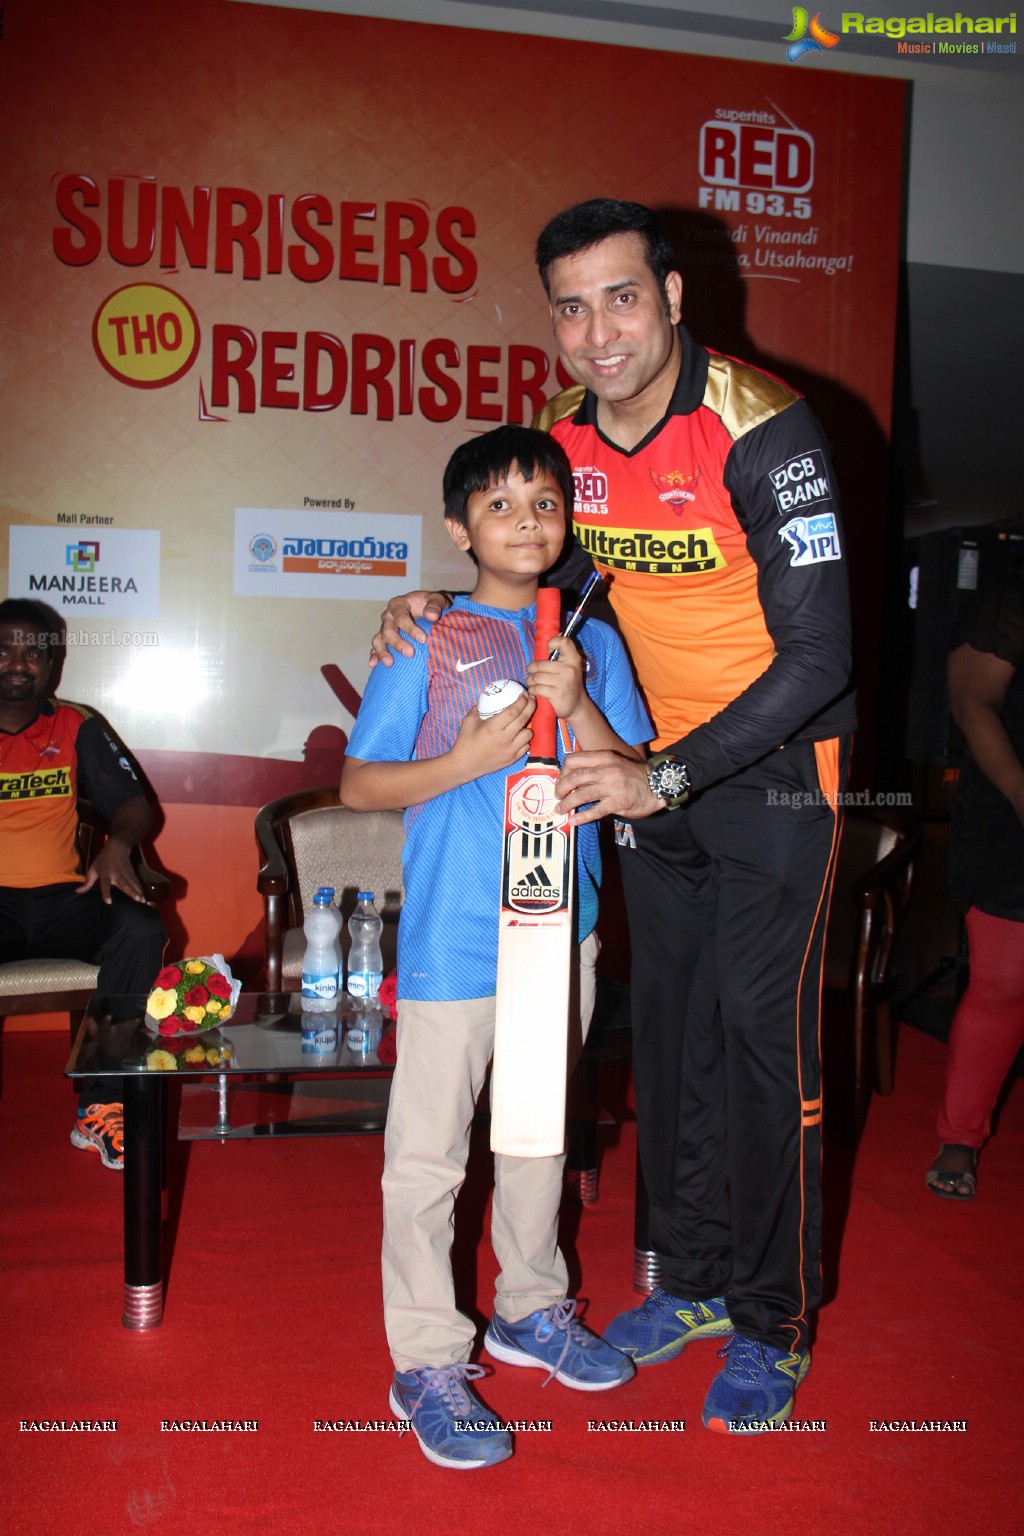 RED FM Meet and Greet Session with VVS Laxman and Muttiah Muralitharan at Manjeera Mall, Hyderabad